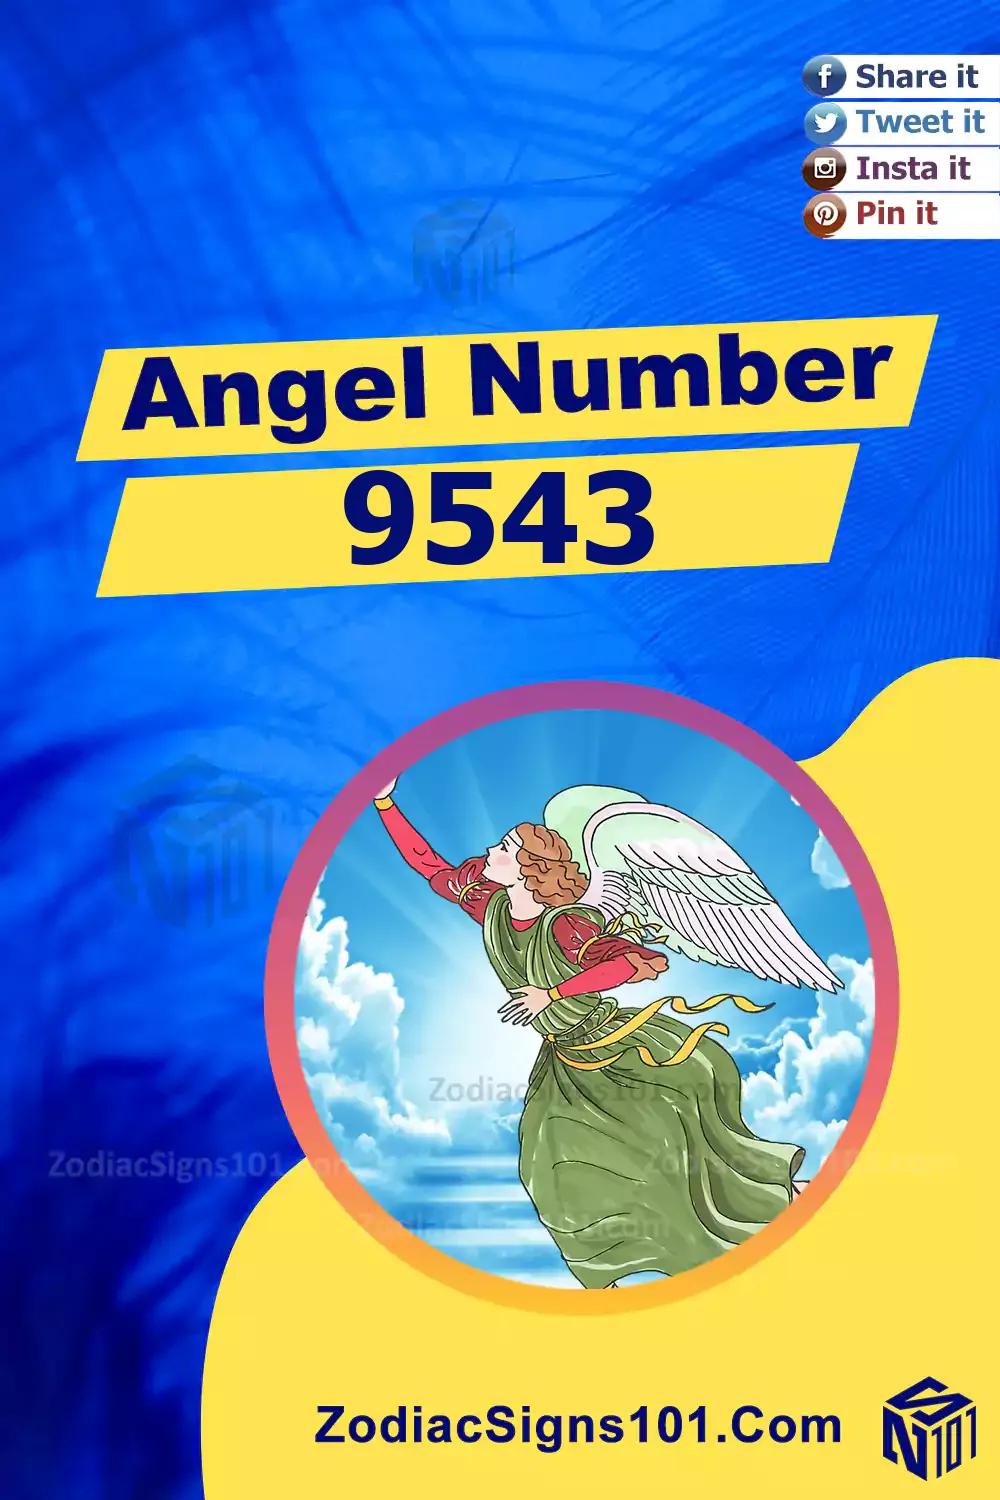 9543-angel-number-spiritual-meaning-and-significance-zodiacsigns101